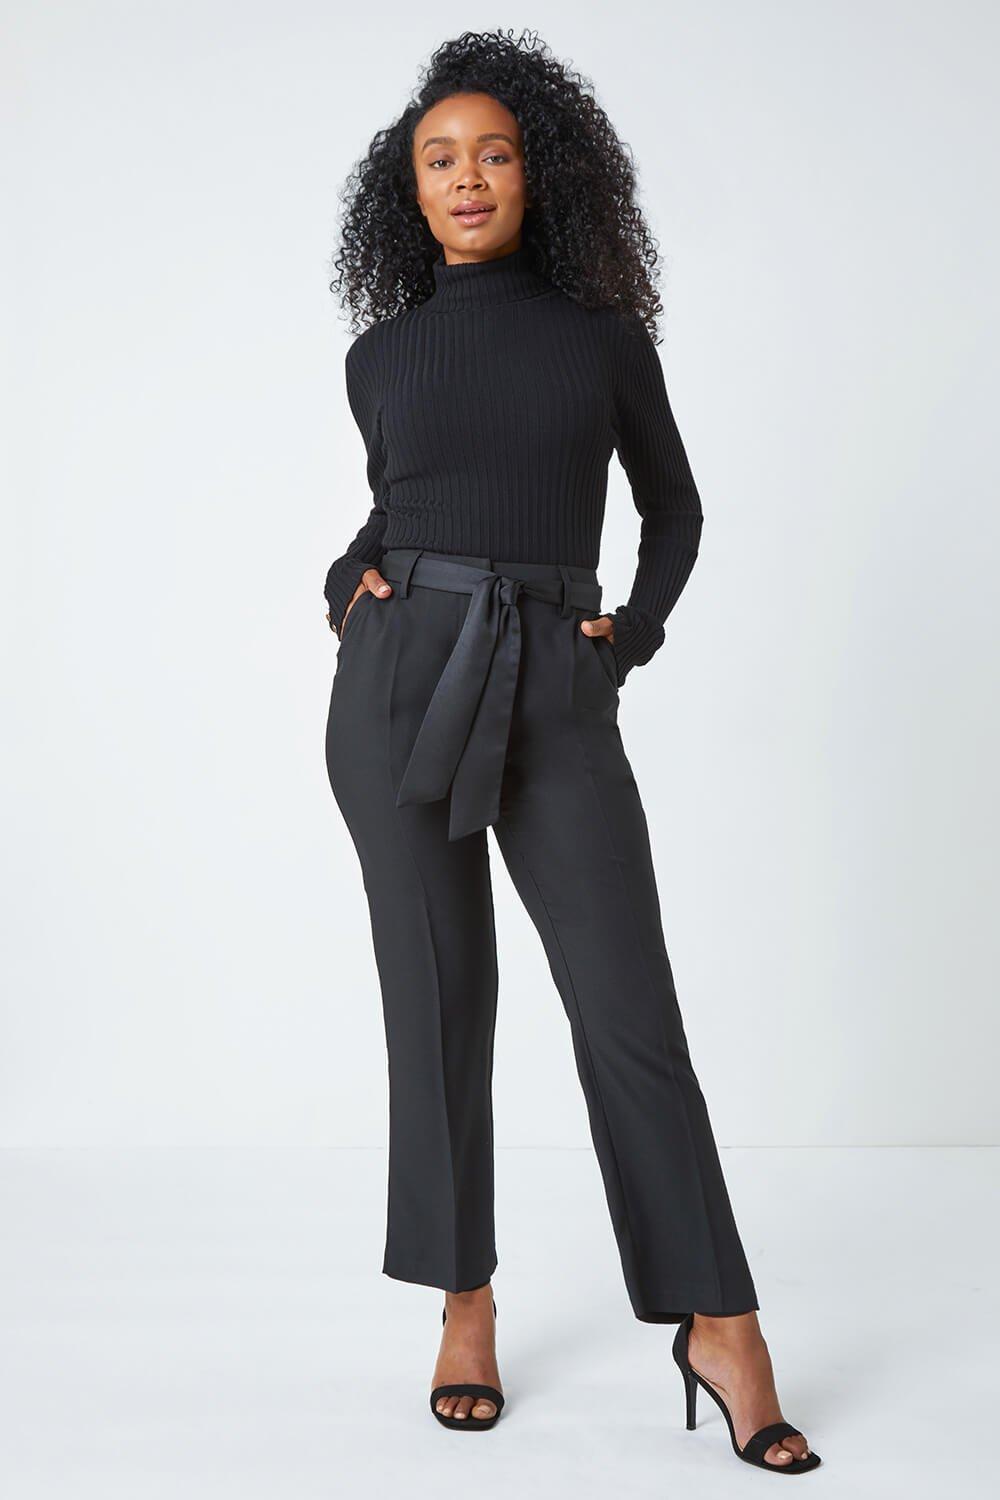 ASOS PETITE Leather Look Tapered Trouser with Elasticated Back -  ShopperBoard